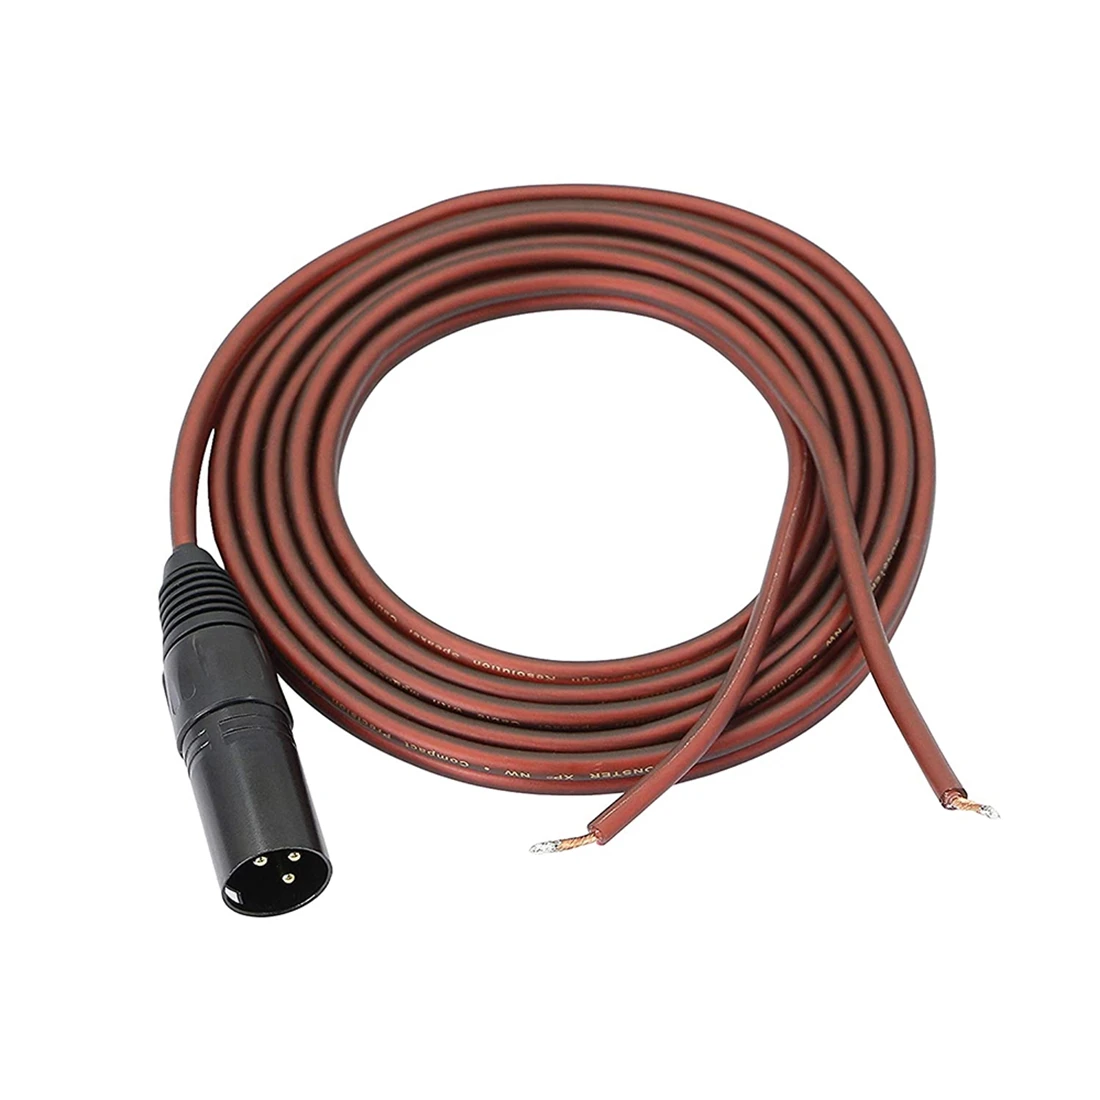 XLR Speaker Wire, Speaker Bare Cable to XLR Plug, Gold Plated XLR 3 Pin Male Connector Replacement Audio Cable Open End